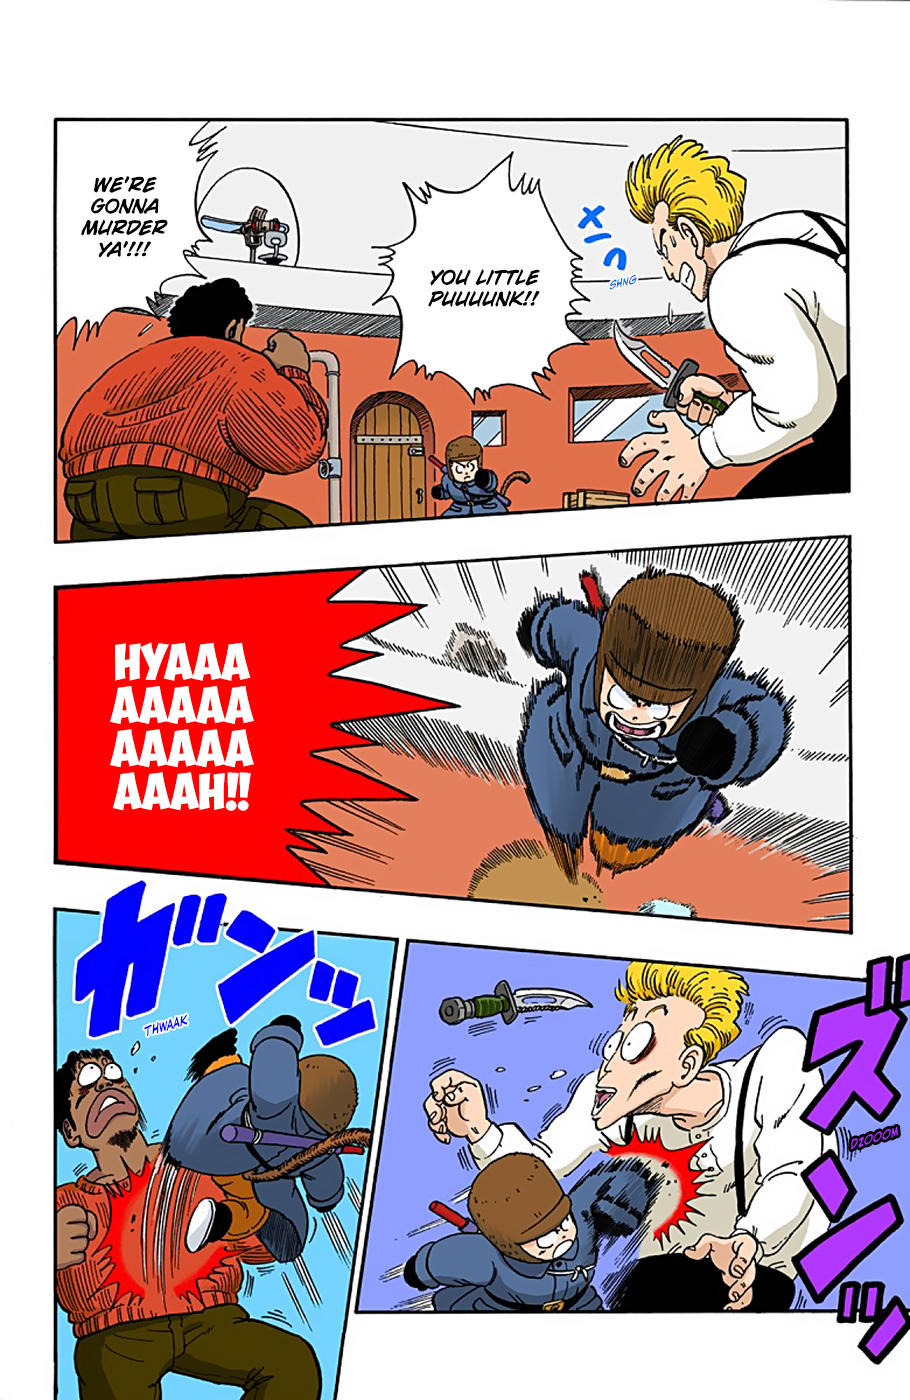 Dragon Ball - Full Color Edition Vol.5 Chapter 58: The Horror Of Muscle Tower page 6 - Mangakakalot